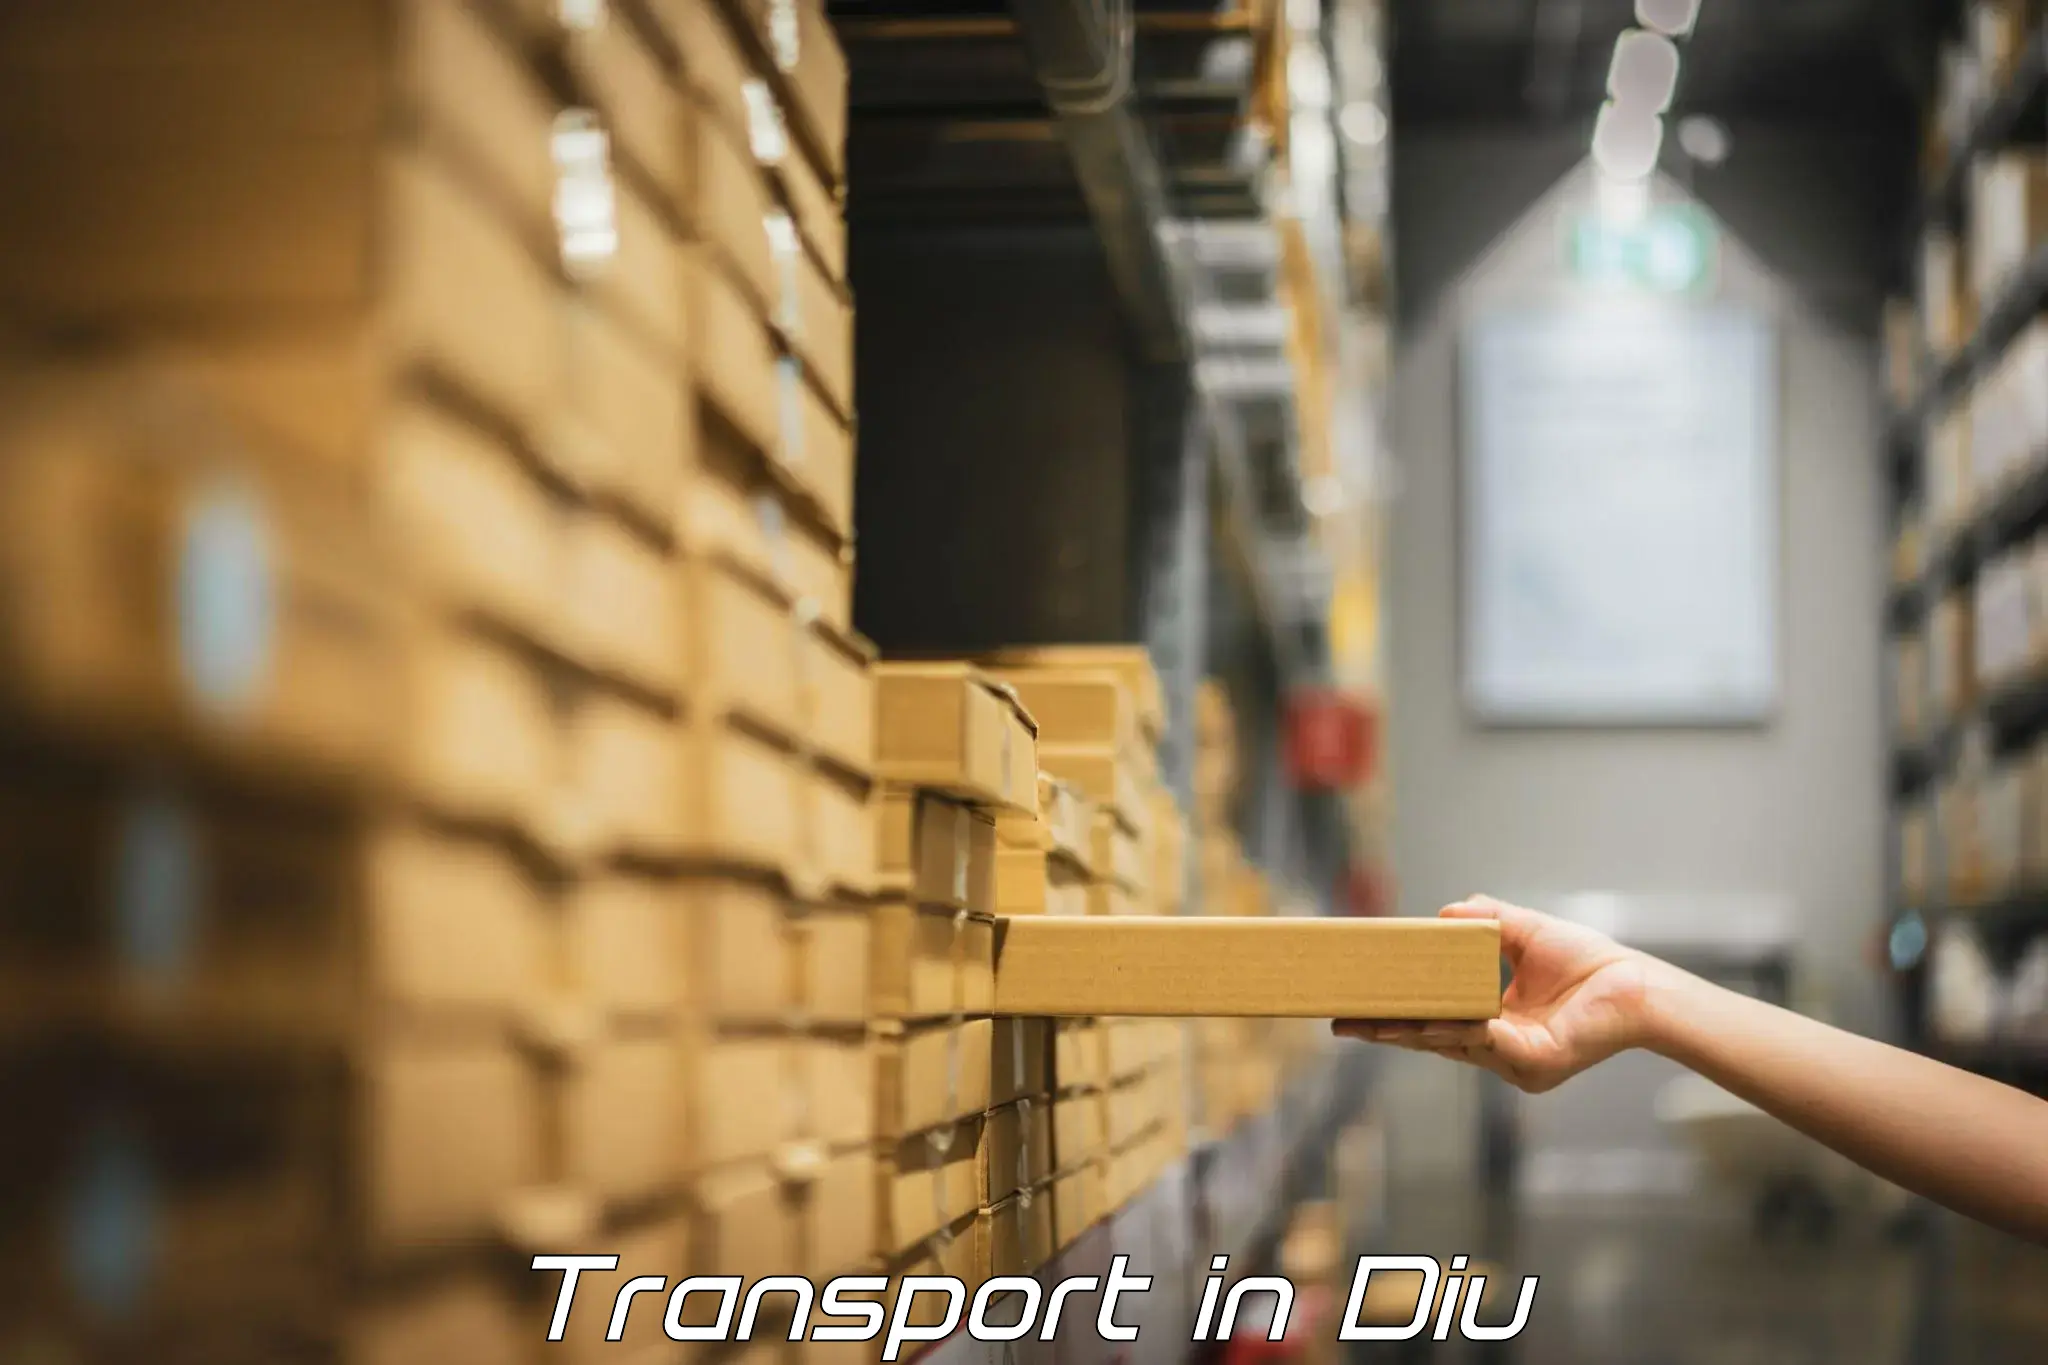 Daily parcel service transport in Diu